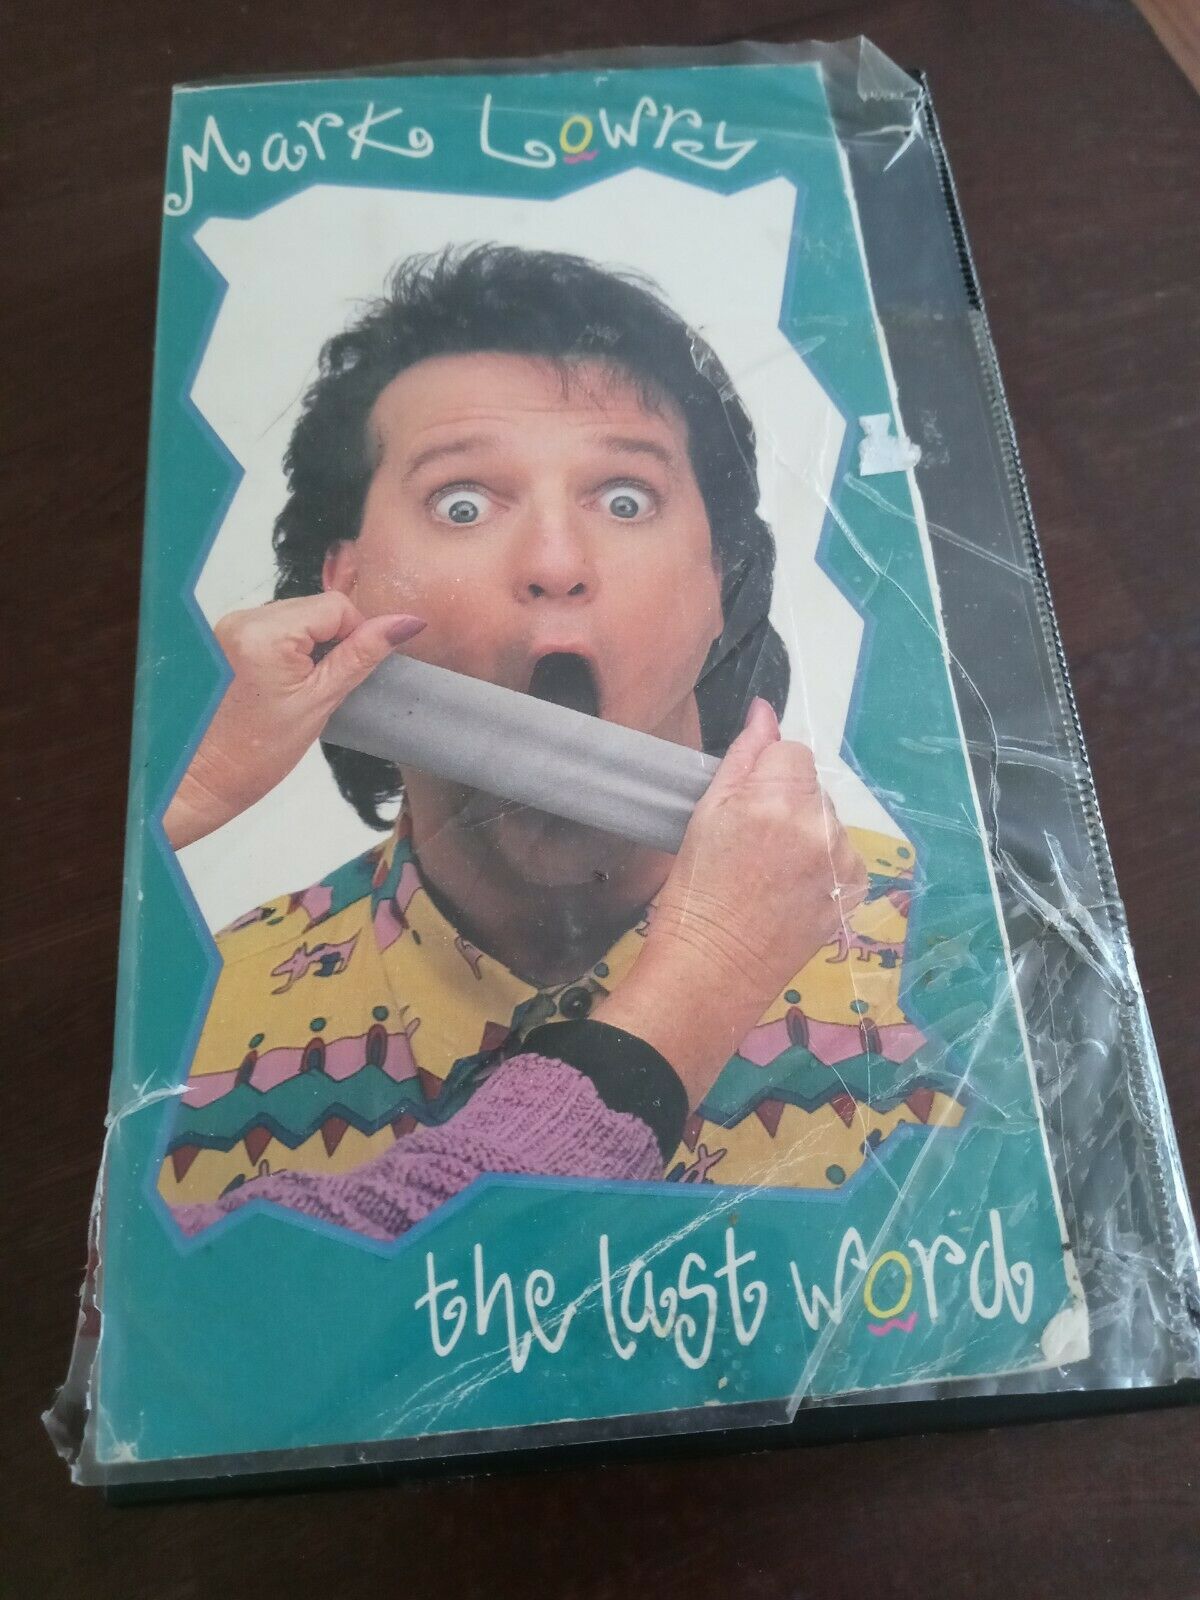 Primary image for Mark Lowry: The Last Word (VHS, 1993) Mark Lowry